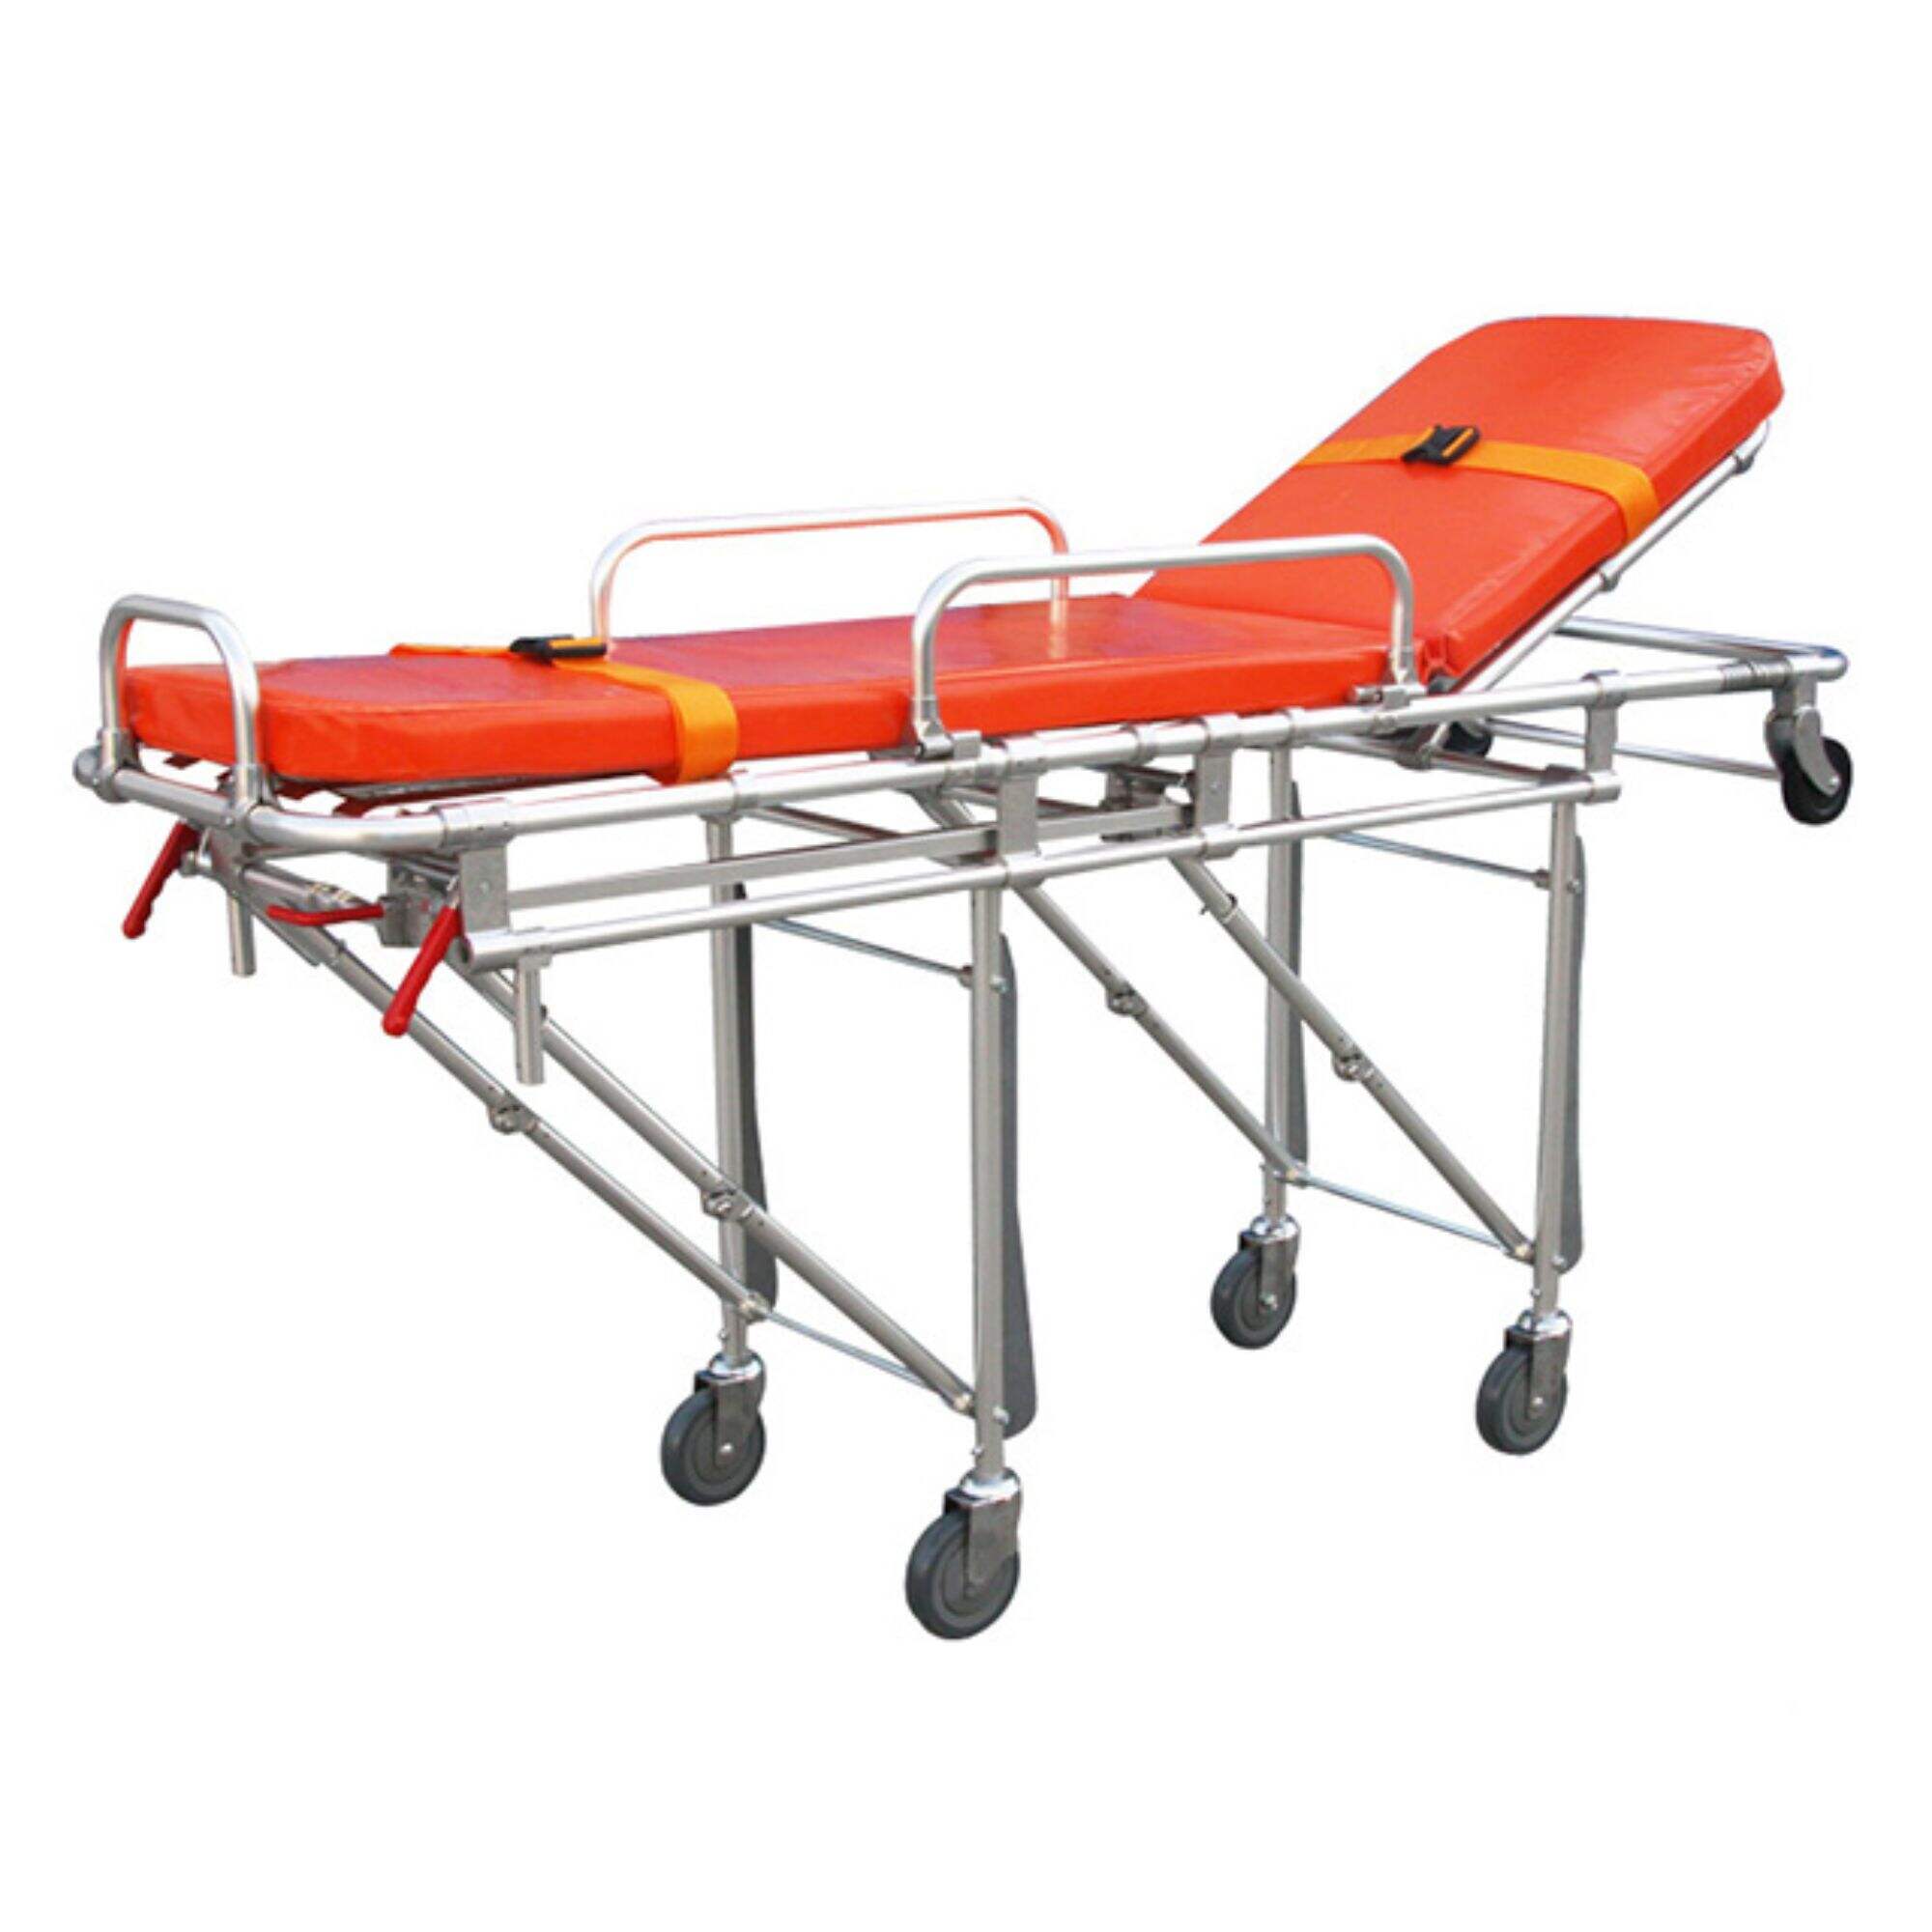 YXH-3A5 Collapsible Trolley Aluminum Ambulance Stretcher Bed